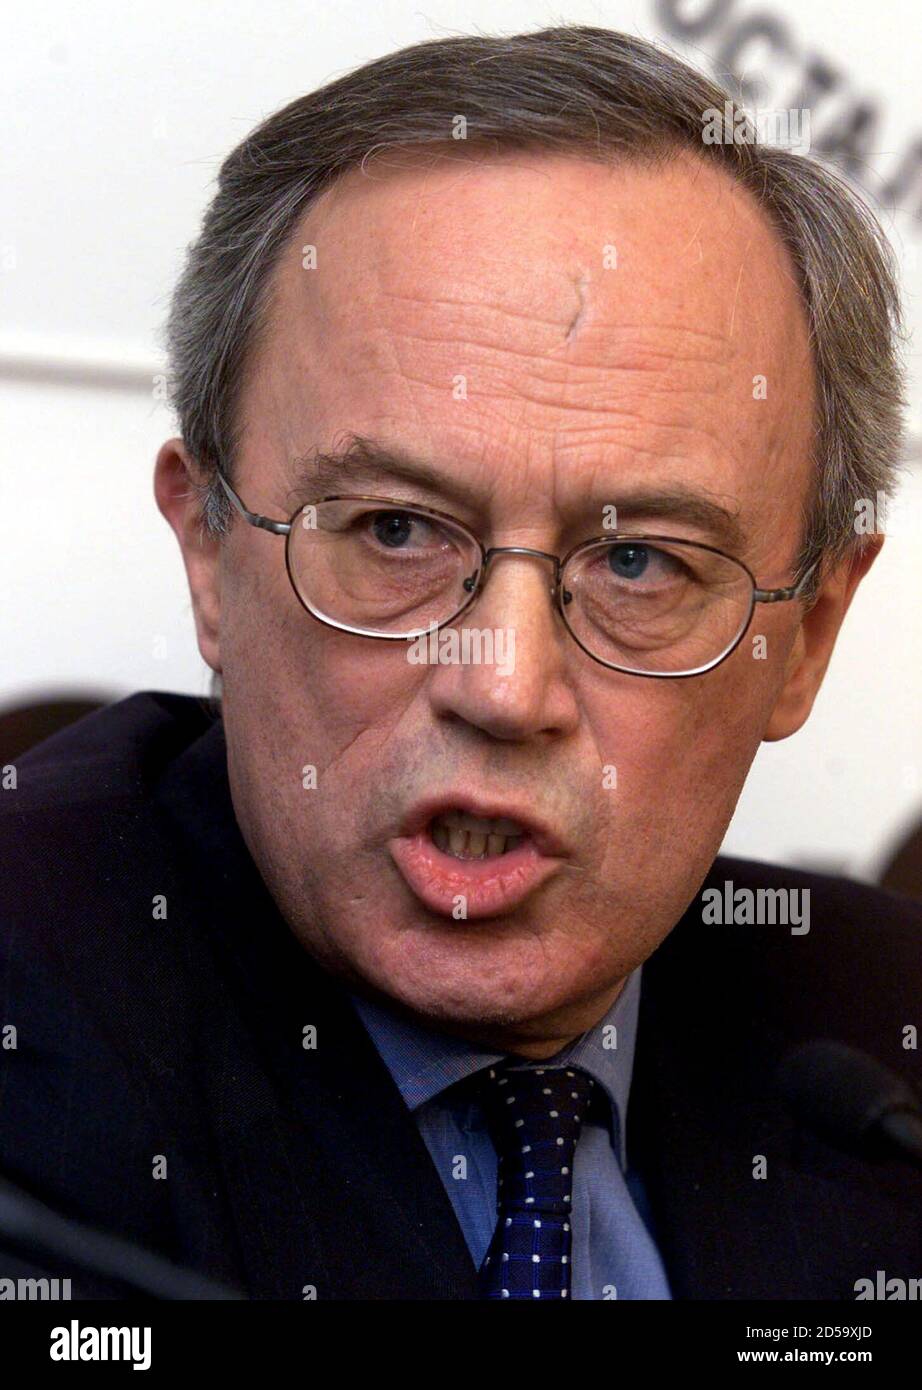 British Ambassador Sir Andrew Wood answers journalists' questions during a news conference in Moscow November 16. Wood outlined the British government's position concerning an attack on Russian journalists that took place at a pro-Chechen meeting in London last Friday.  WAW Stock Photo